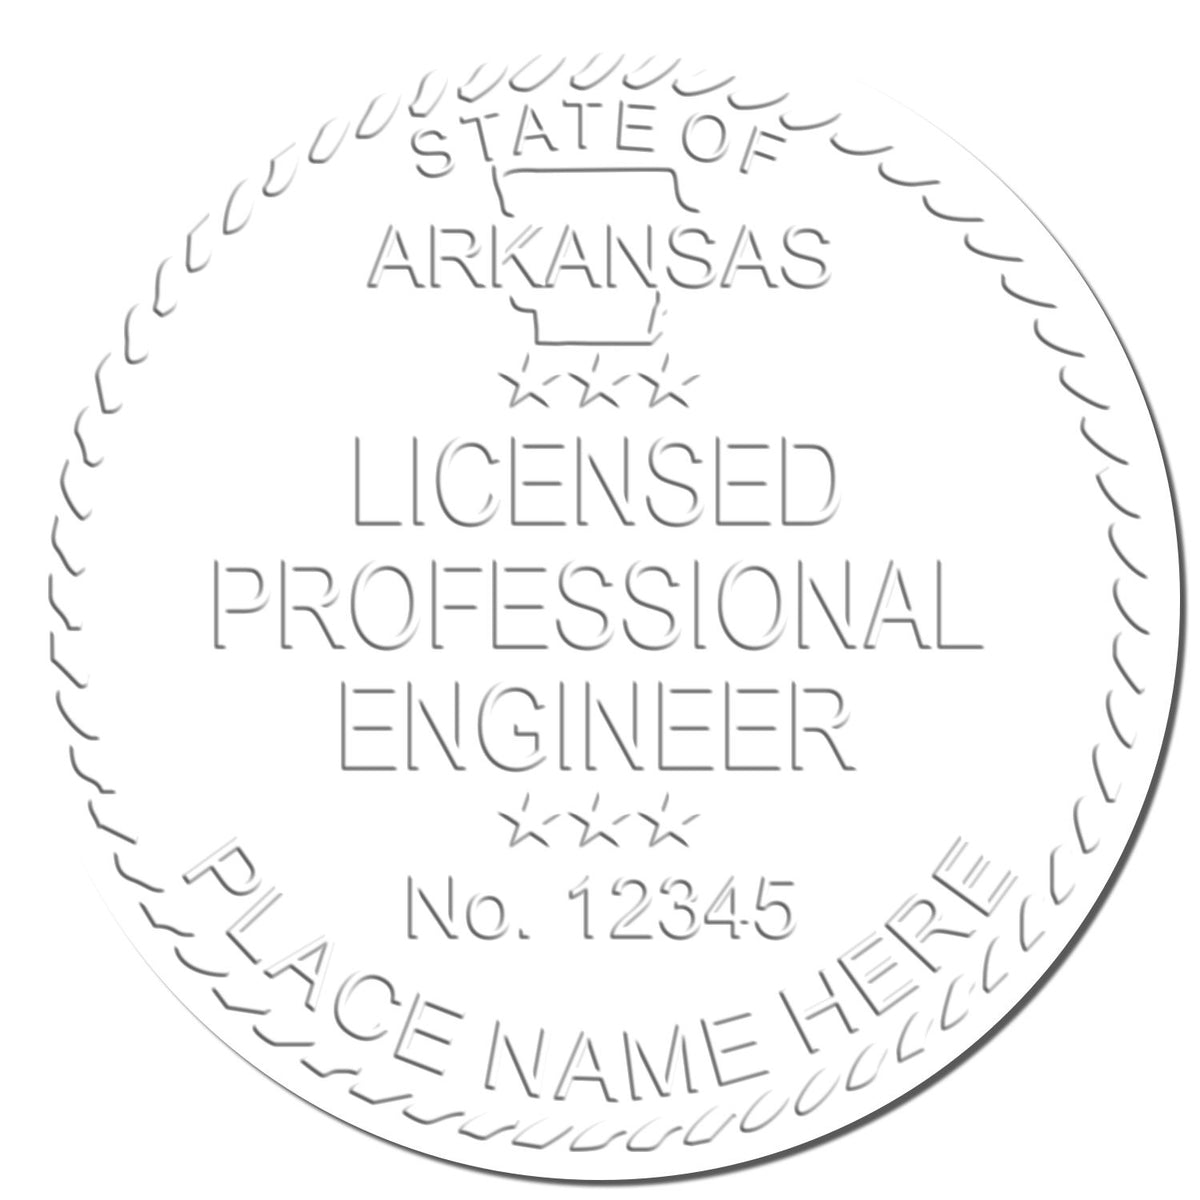 A photograph of the Handheld Arkansas Professional Engineer Embosser stamp impression reveals a vivid, professional image of the on paper.